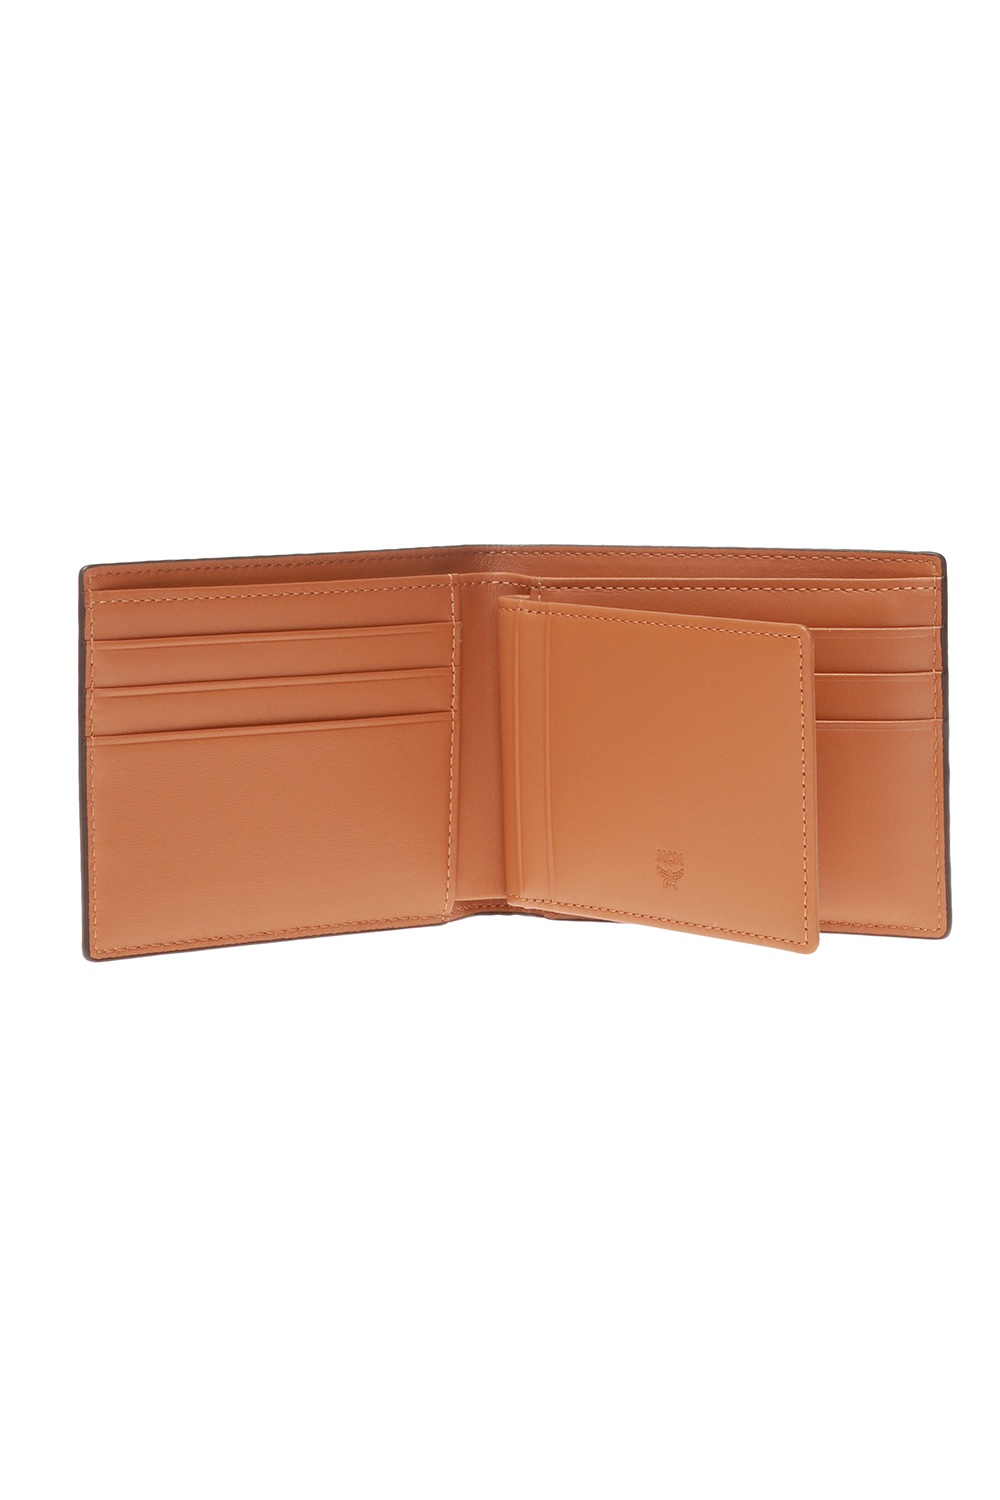 MCM 'Claus Bifold' wallet with logo, Men's Accessories